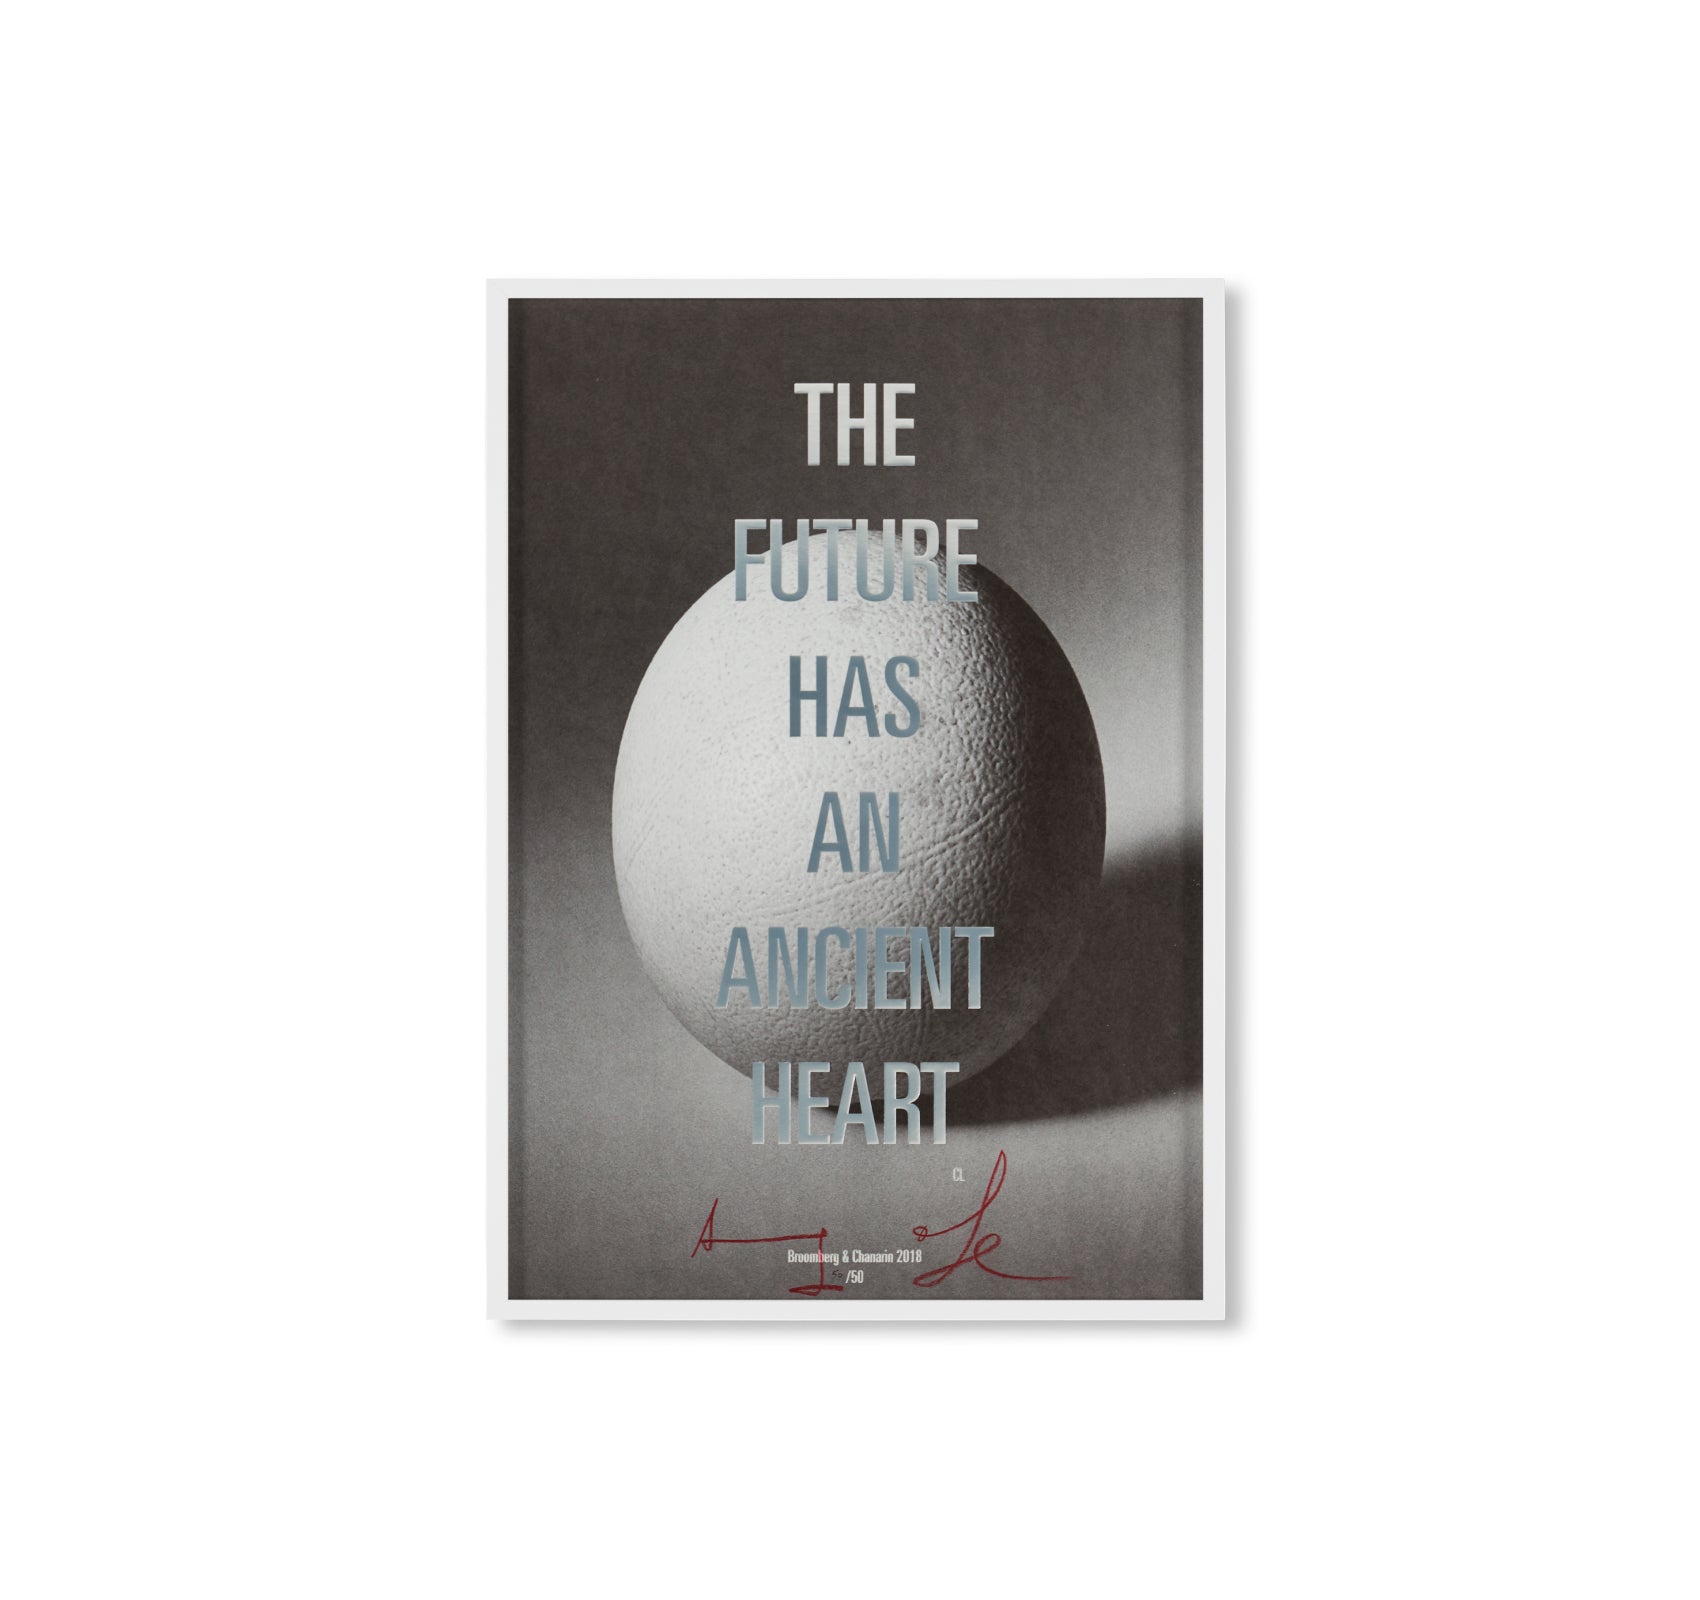 THE FUTURE HAS AN ANCIENT HEART - LIMITED POSTER by Adam Broomberg & Oliver Chanarin [EXCLUSIVE]